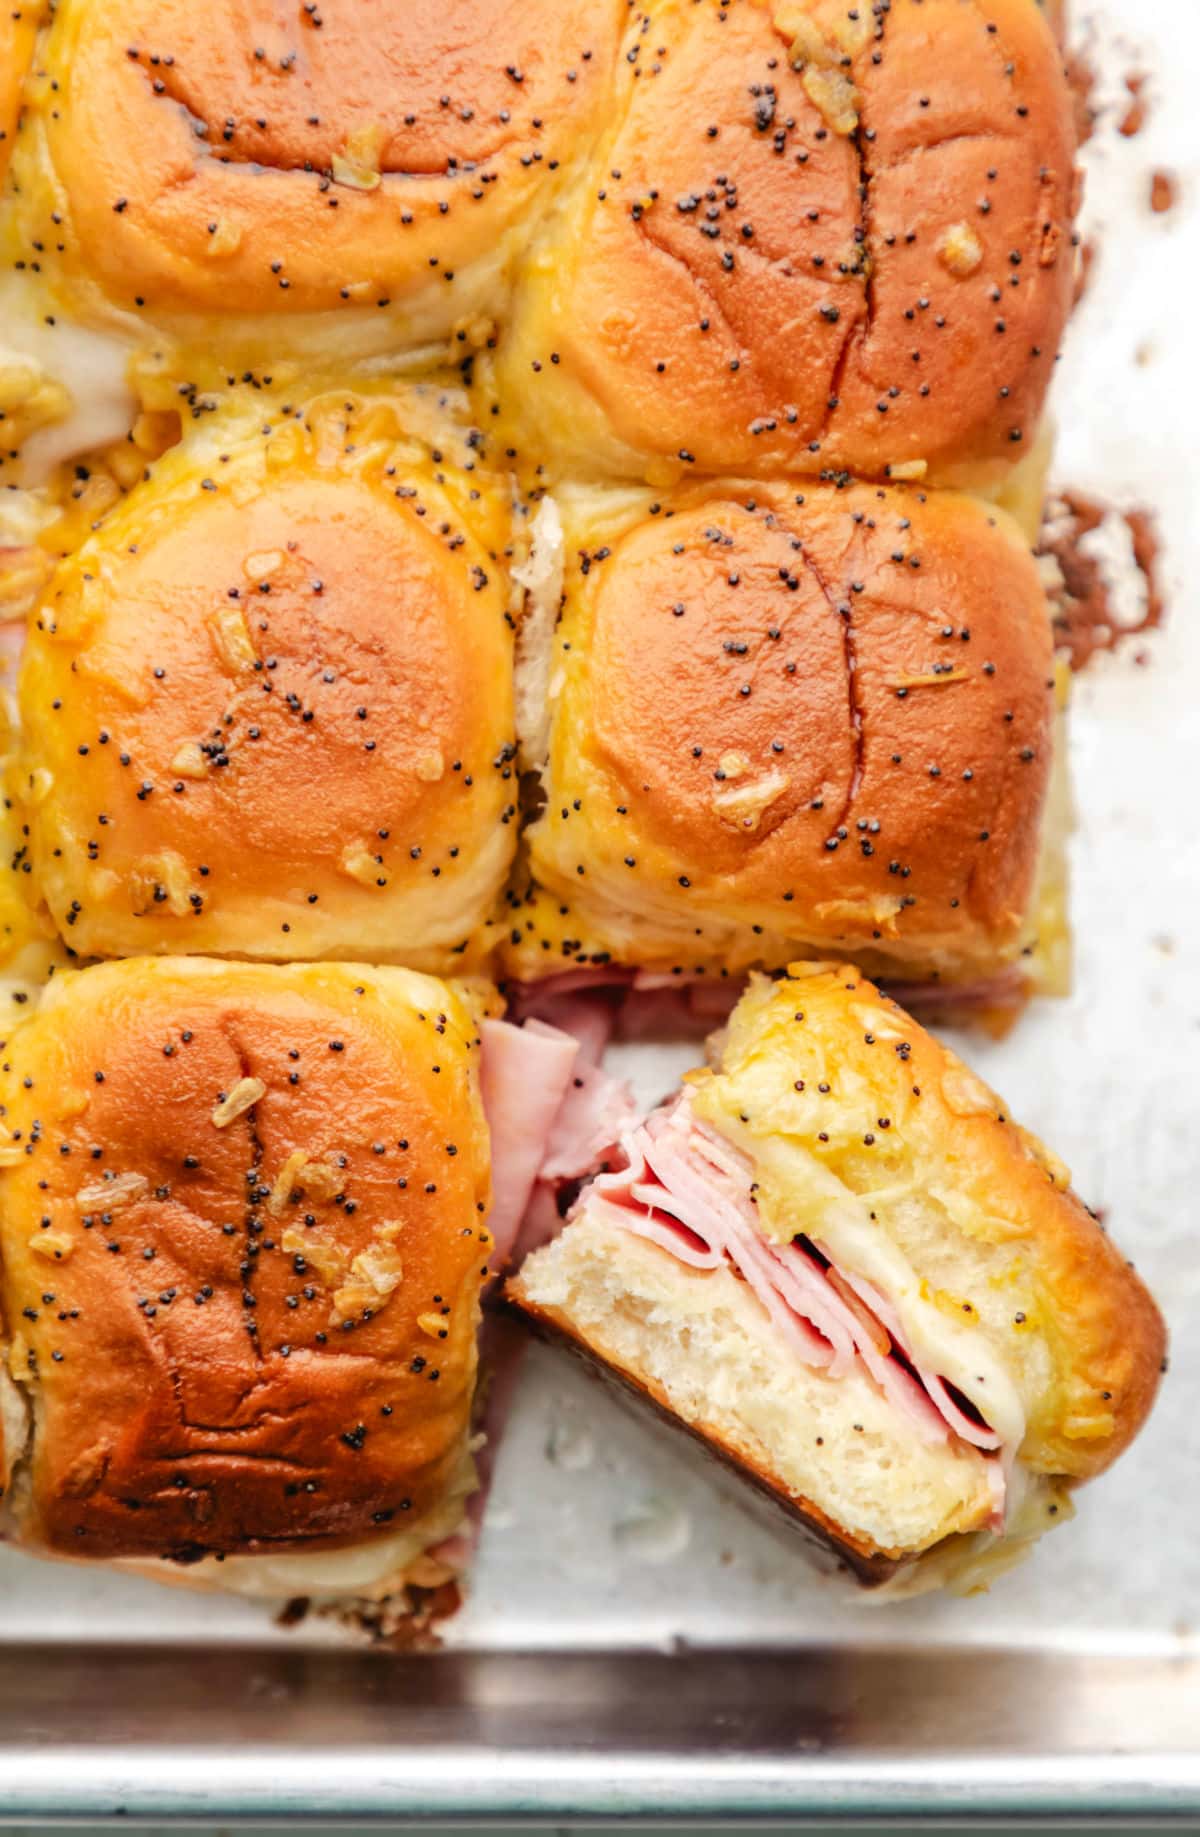 A baked ham and cheese slider turned on its side next to the other sandwiches.